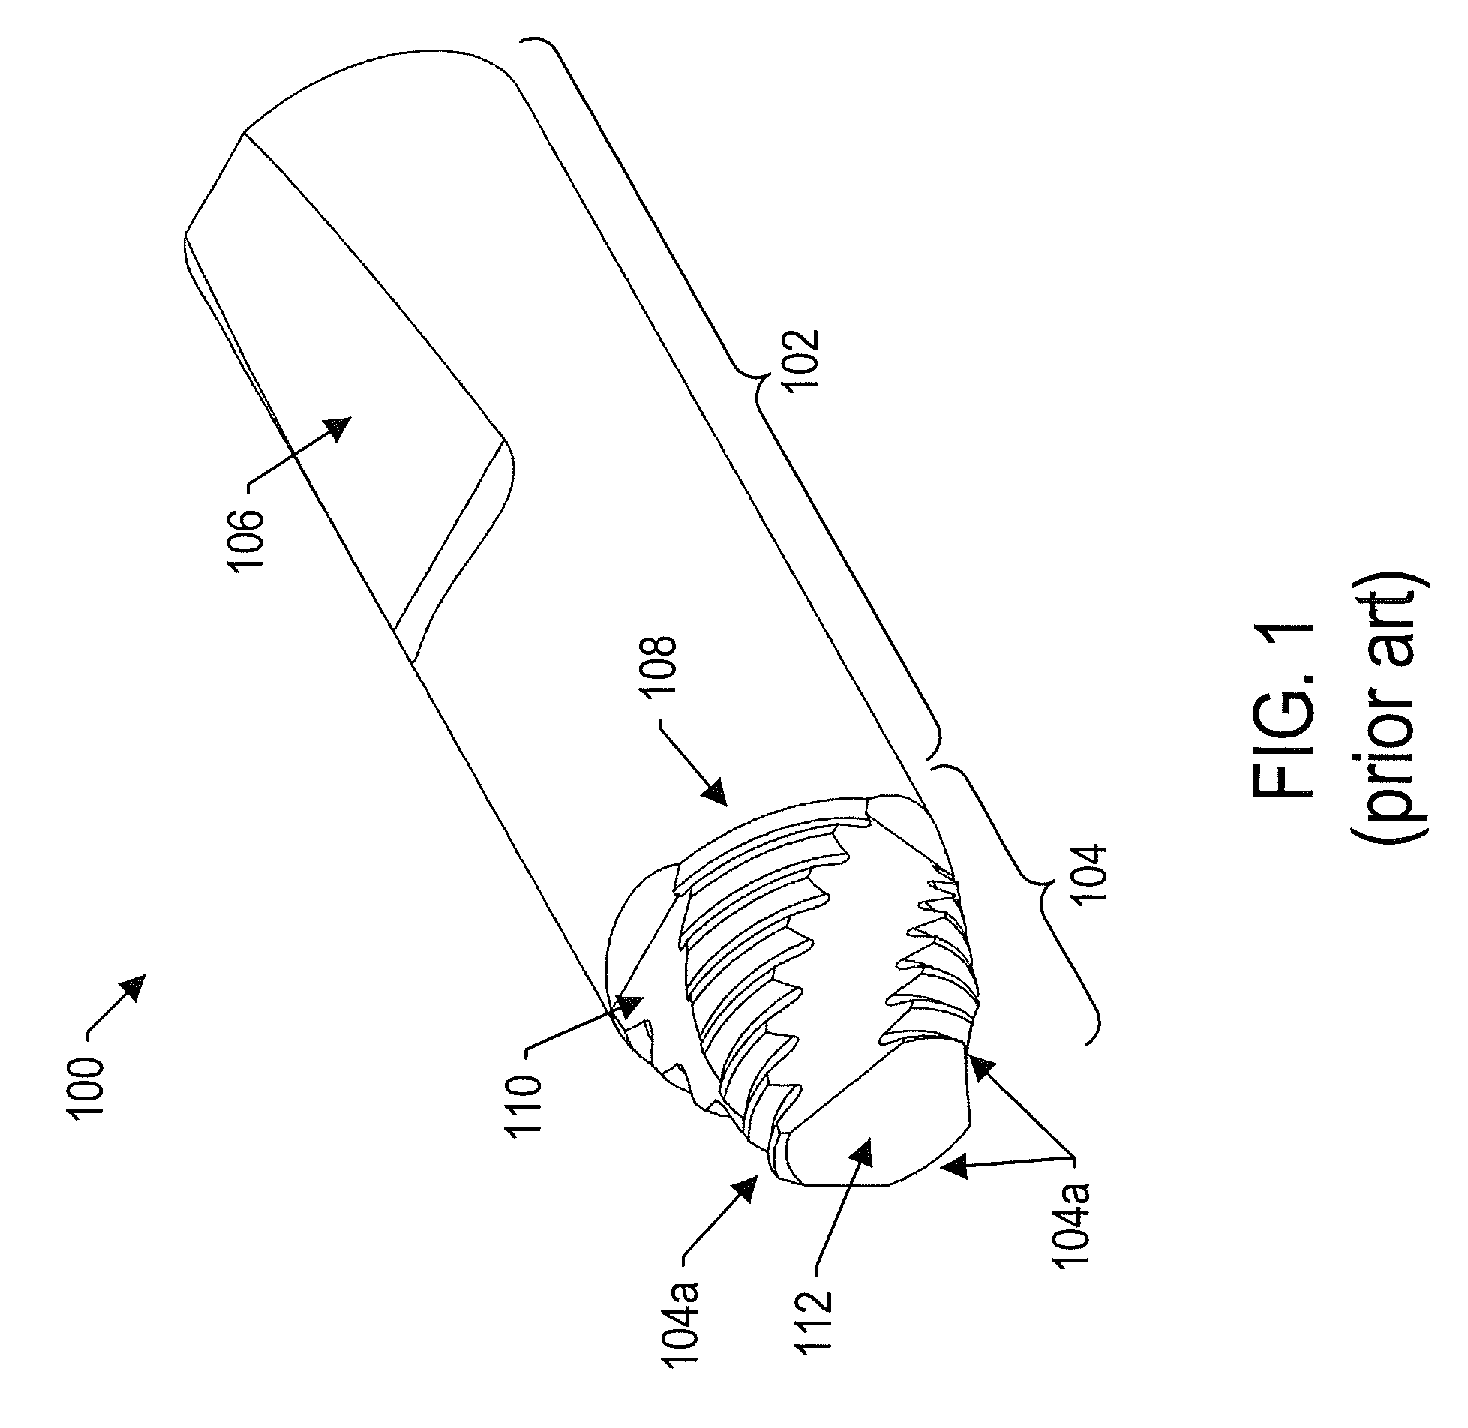 Mandrel tool probe for friction stir welding having physically-separate spiraled surfaces